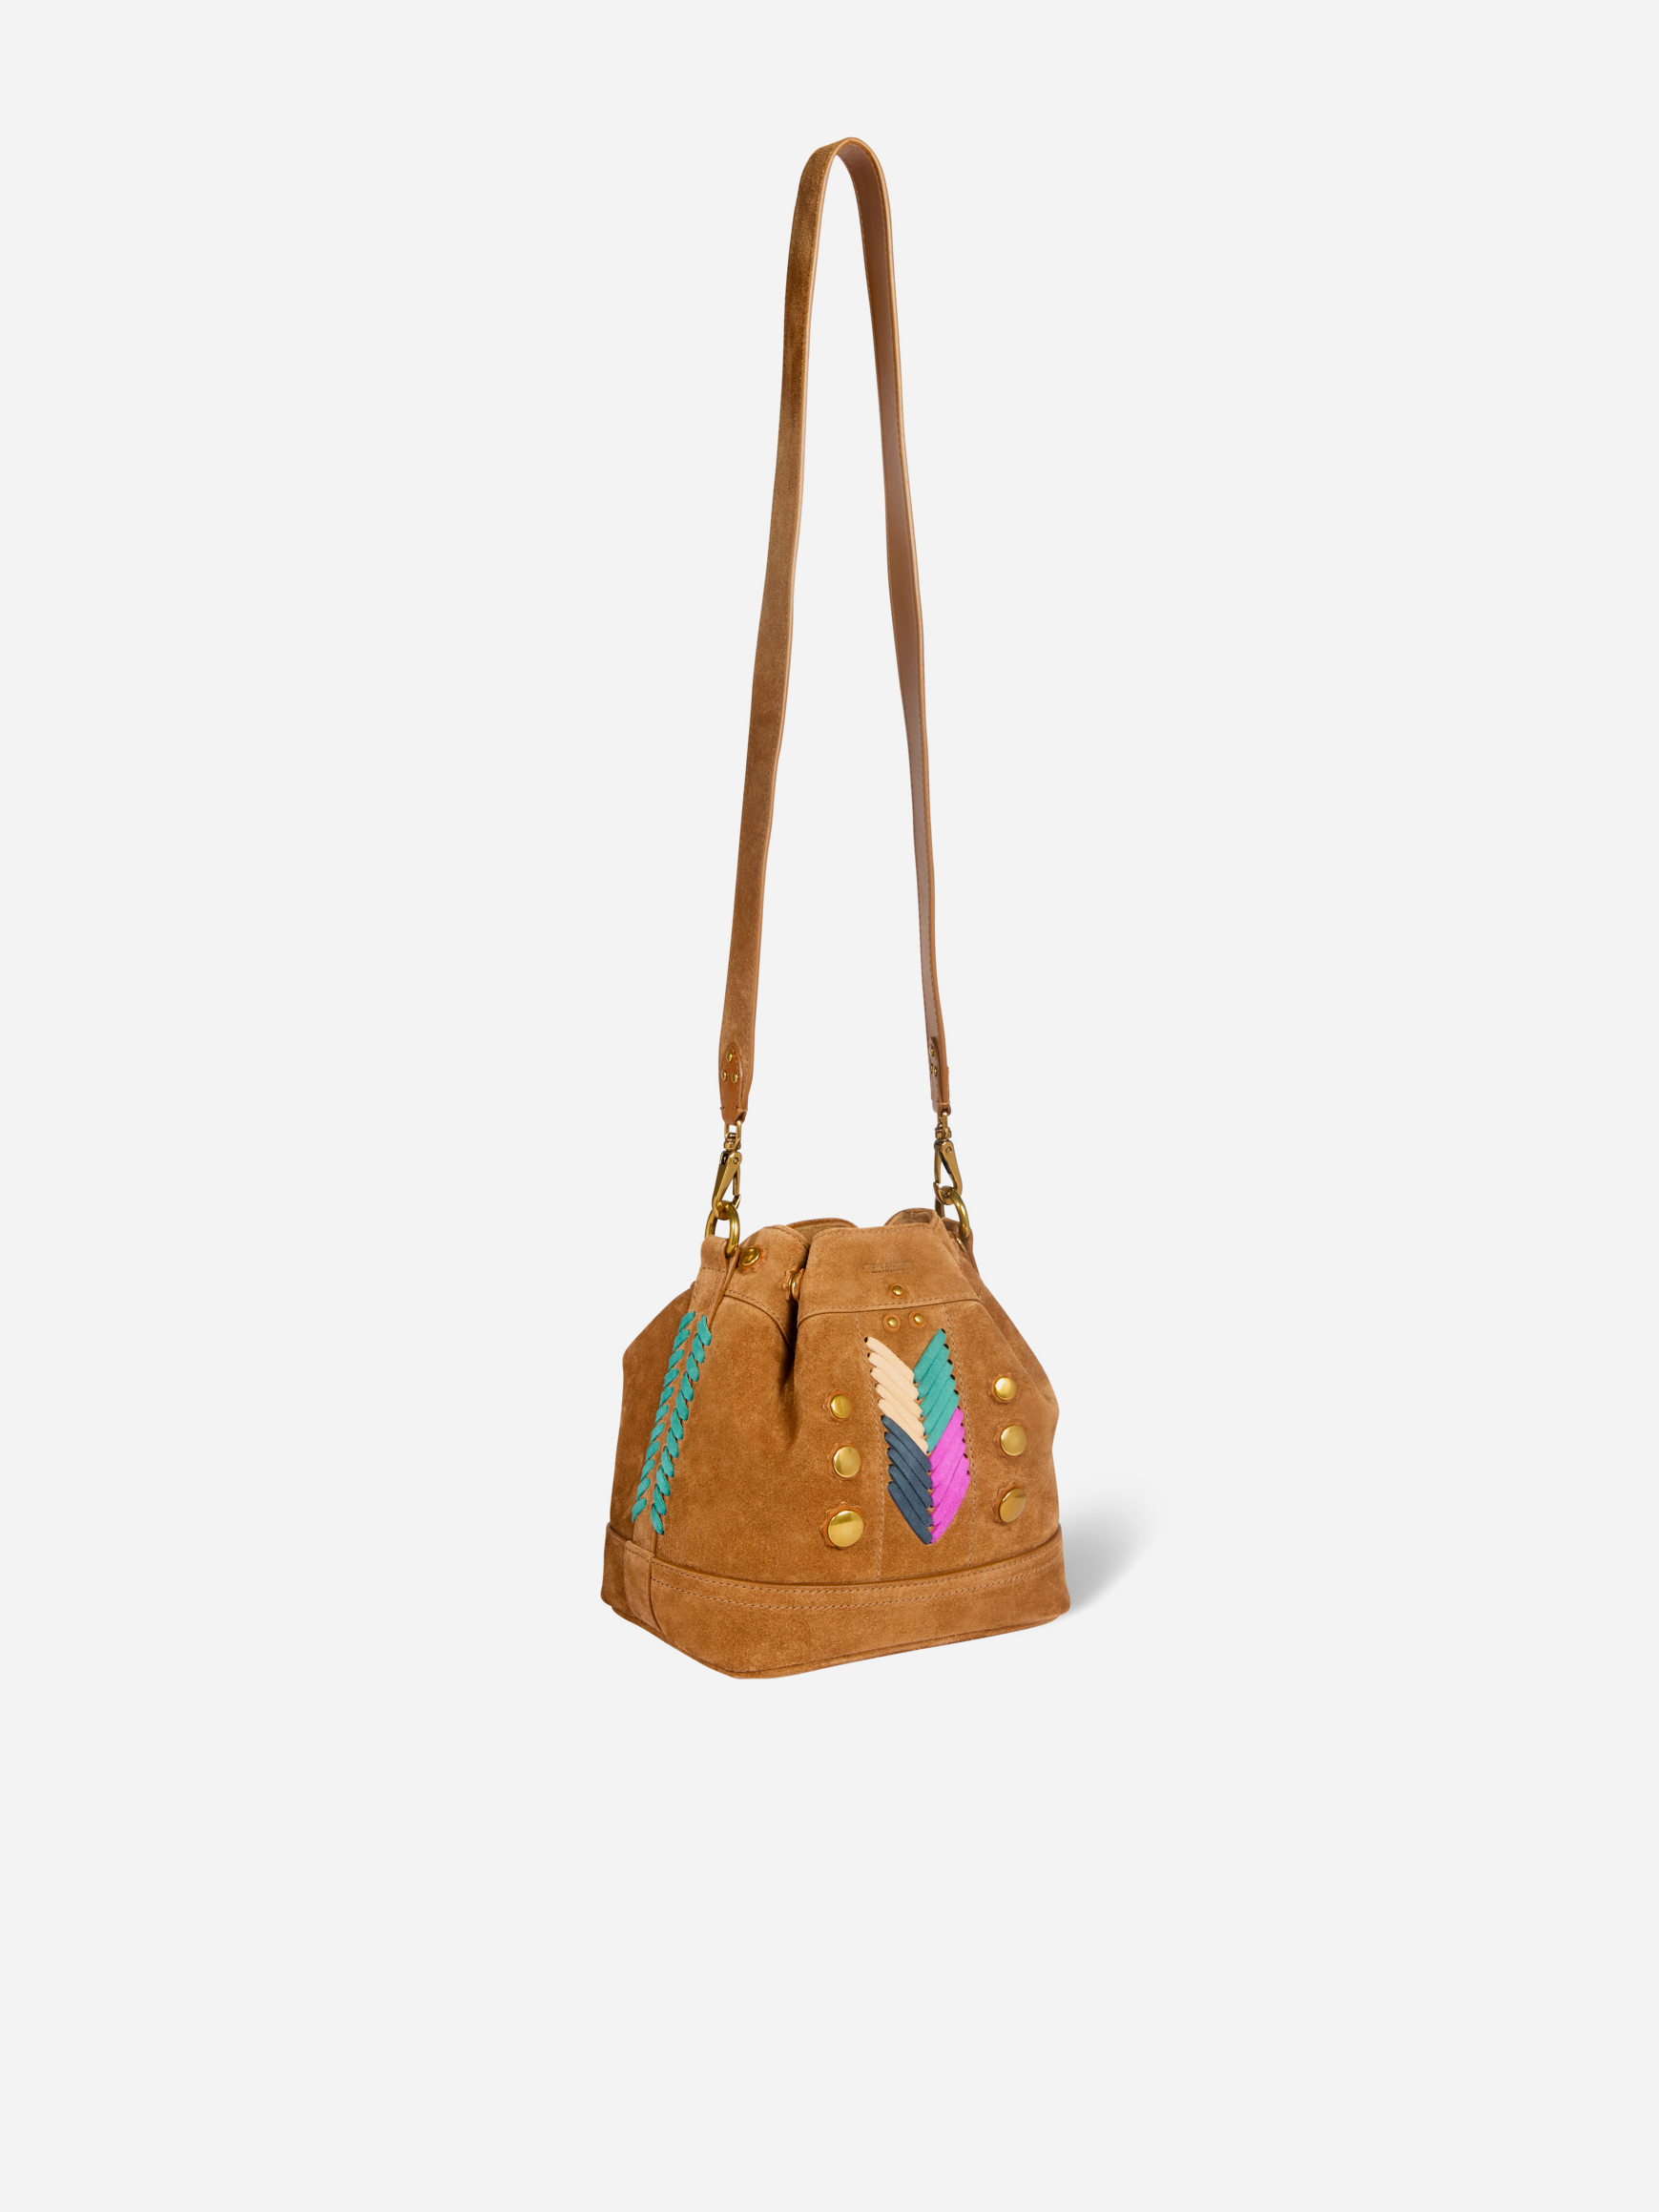 43BENSCAPS_Gaucho-Tabac_bucket-bag-tabac-south-america-gaucho-capsule-collection-jerome-dreyfuss-matchboxathens